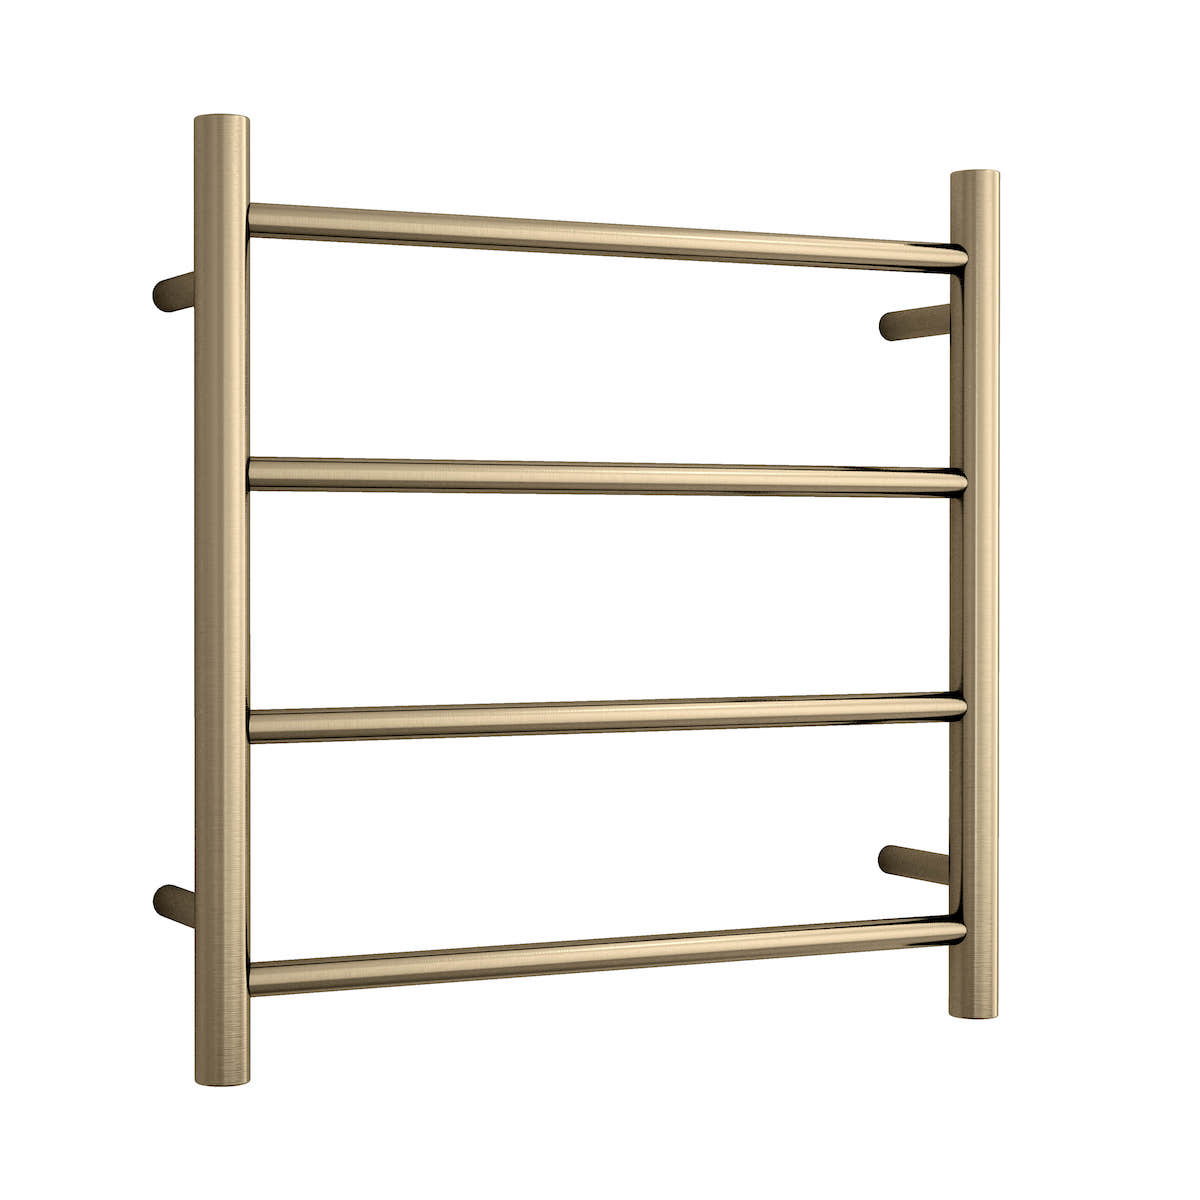 BRUSHED BRASS finish heated towel ladder from Infinity Plus bathrooms deliver AU wide